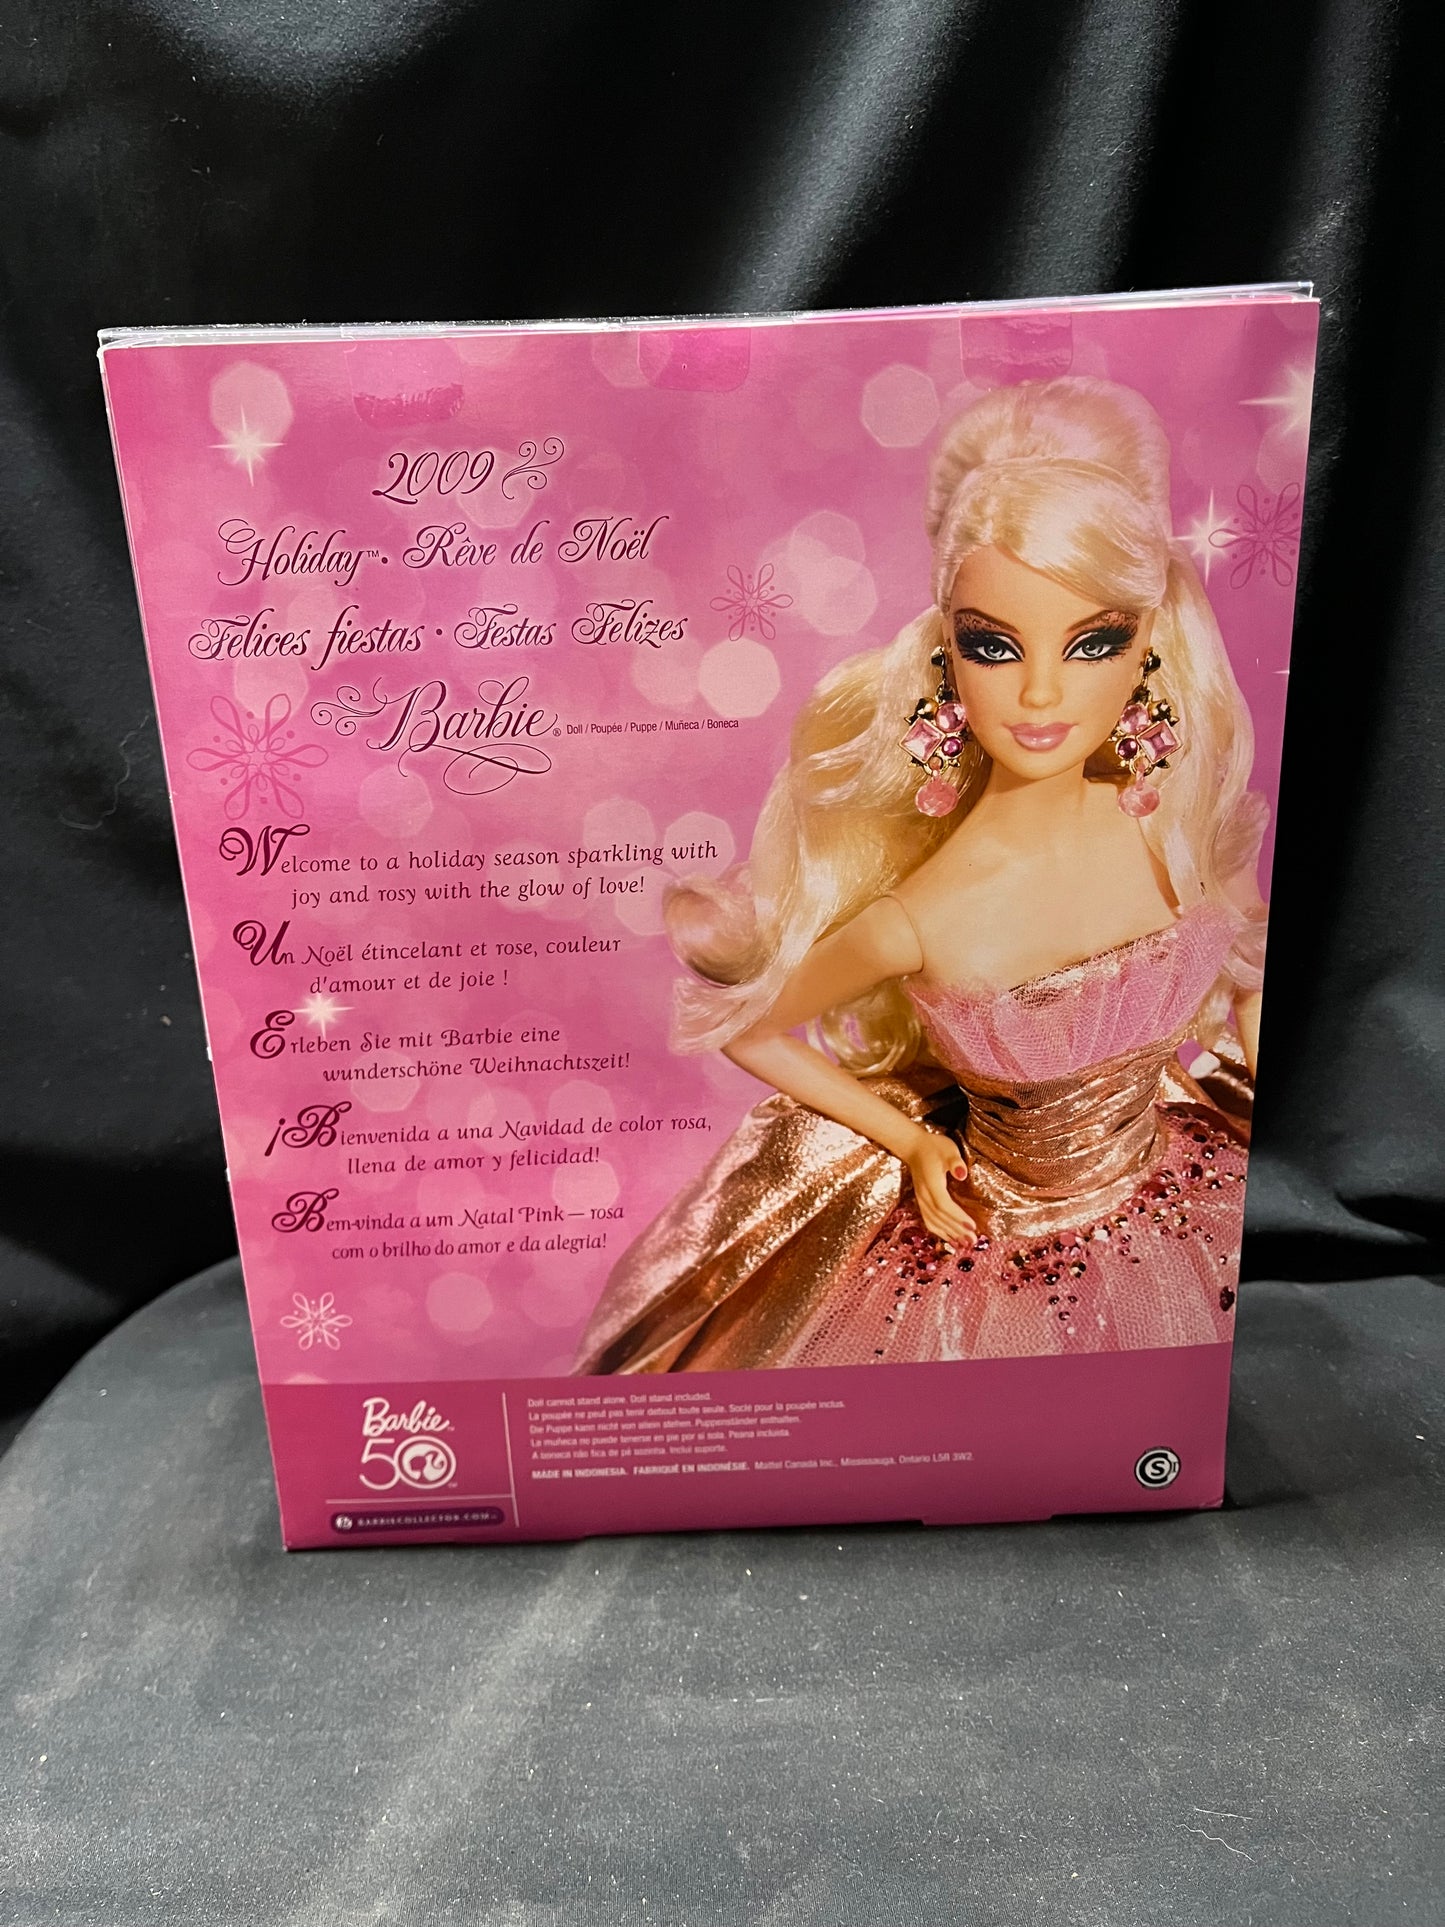 2009 Holiday Barbie Collectible Barbie Doll 50th